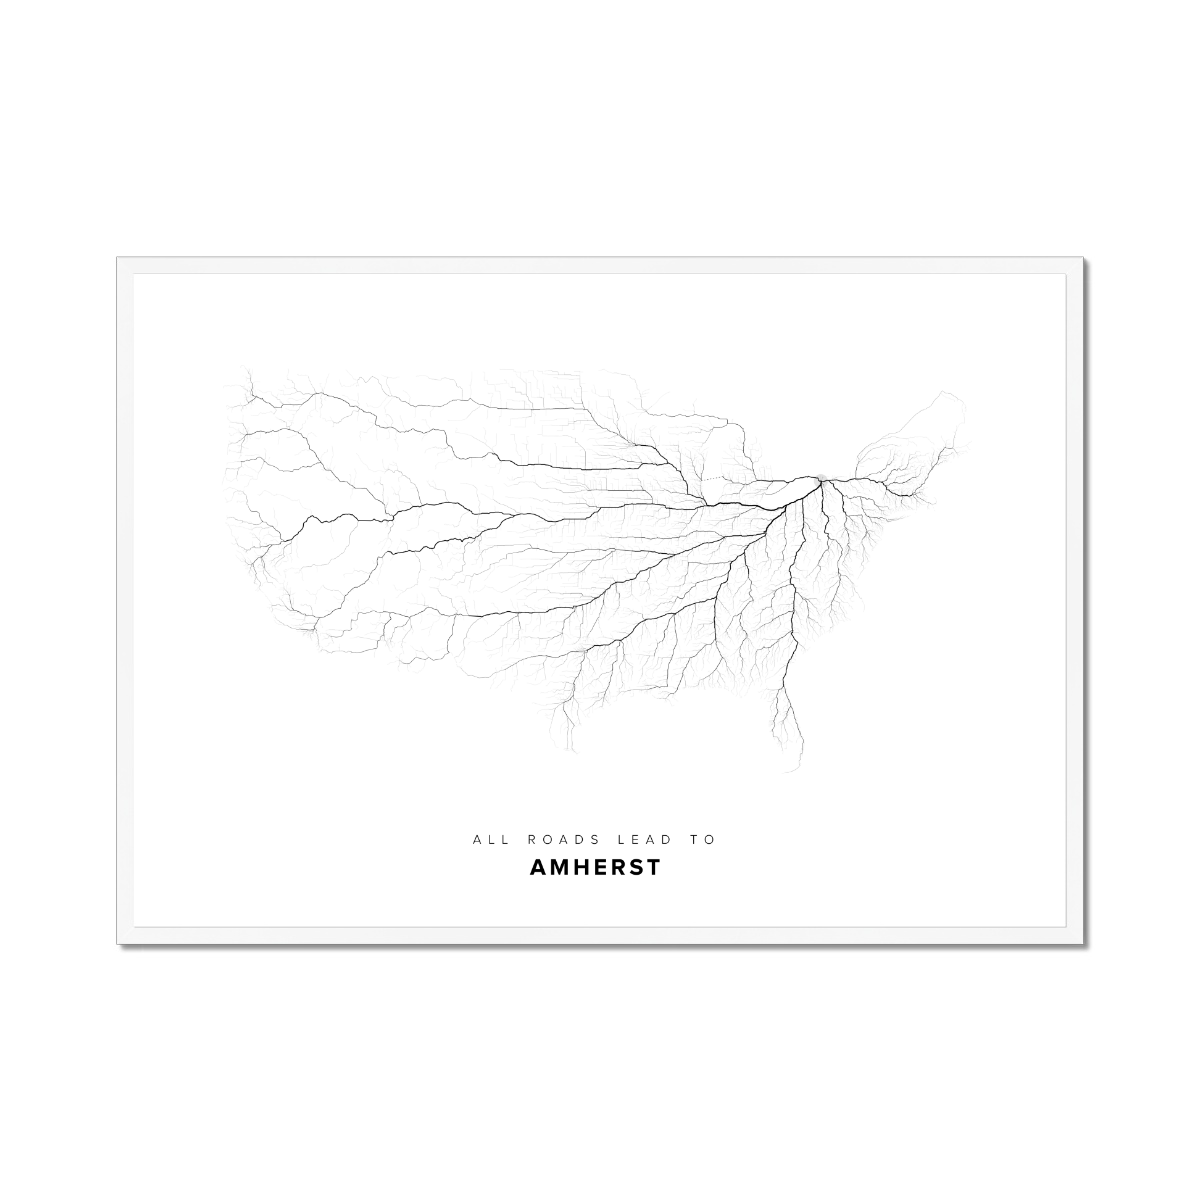 All roads lead to Amherst (United States of America) Fine Art Map Print